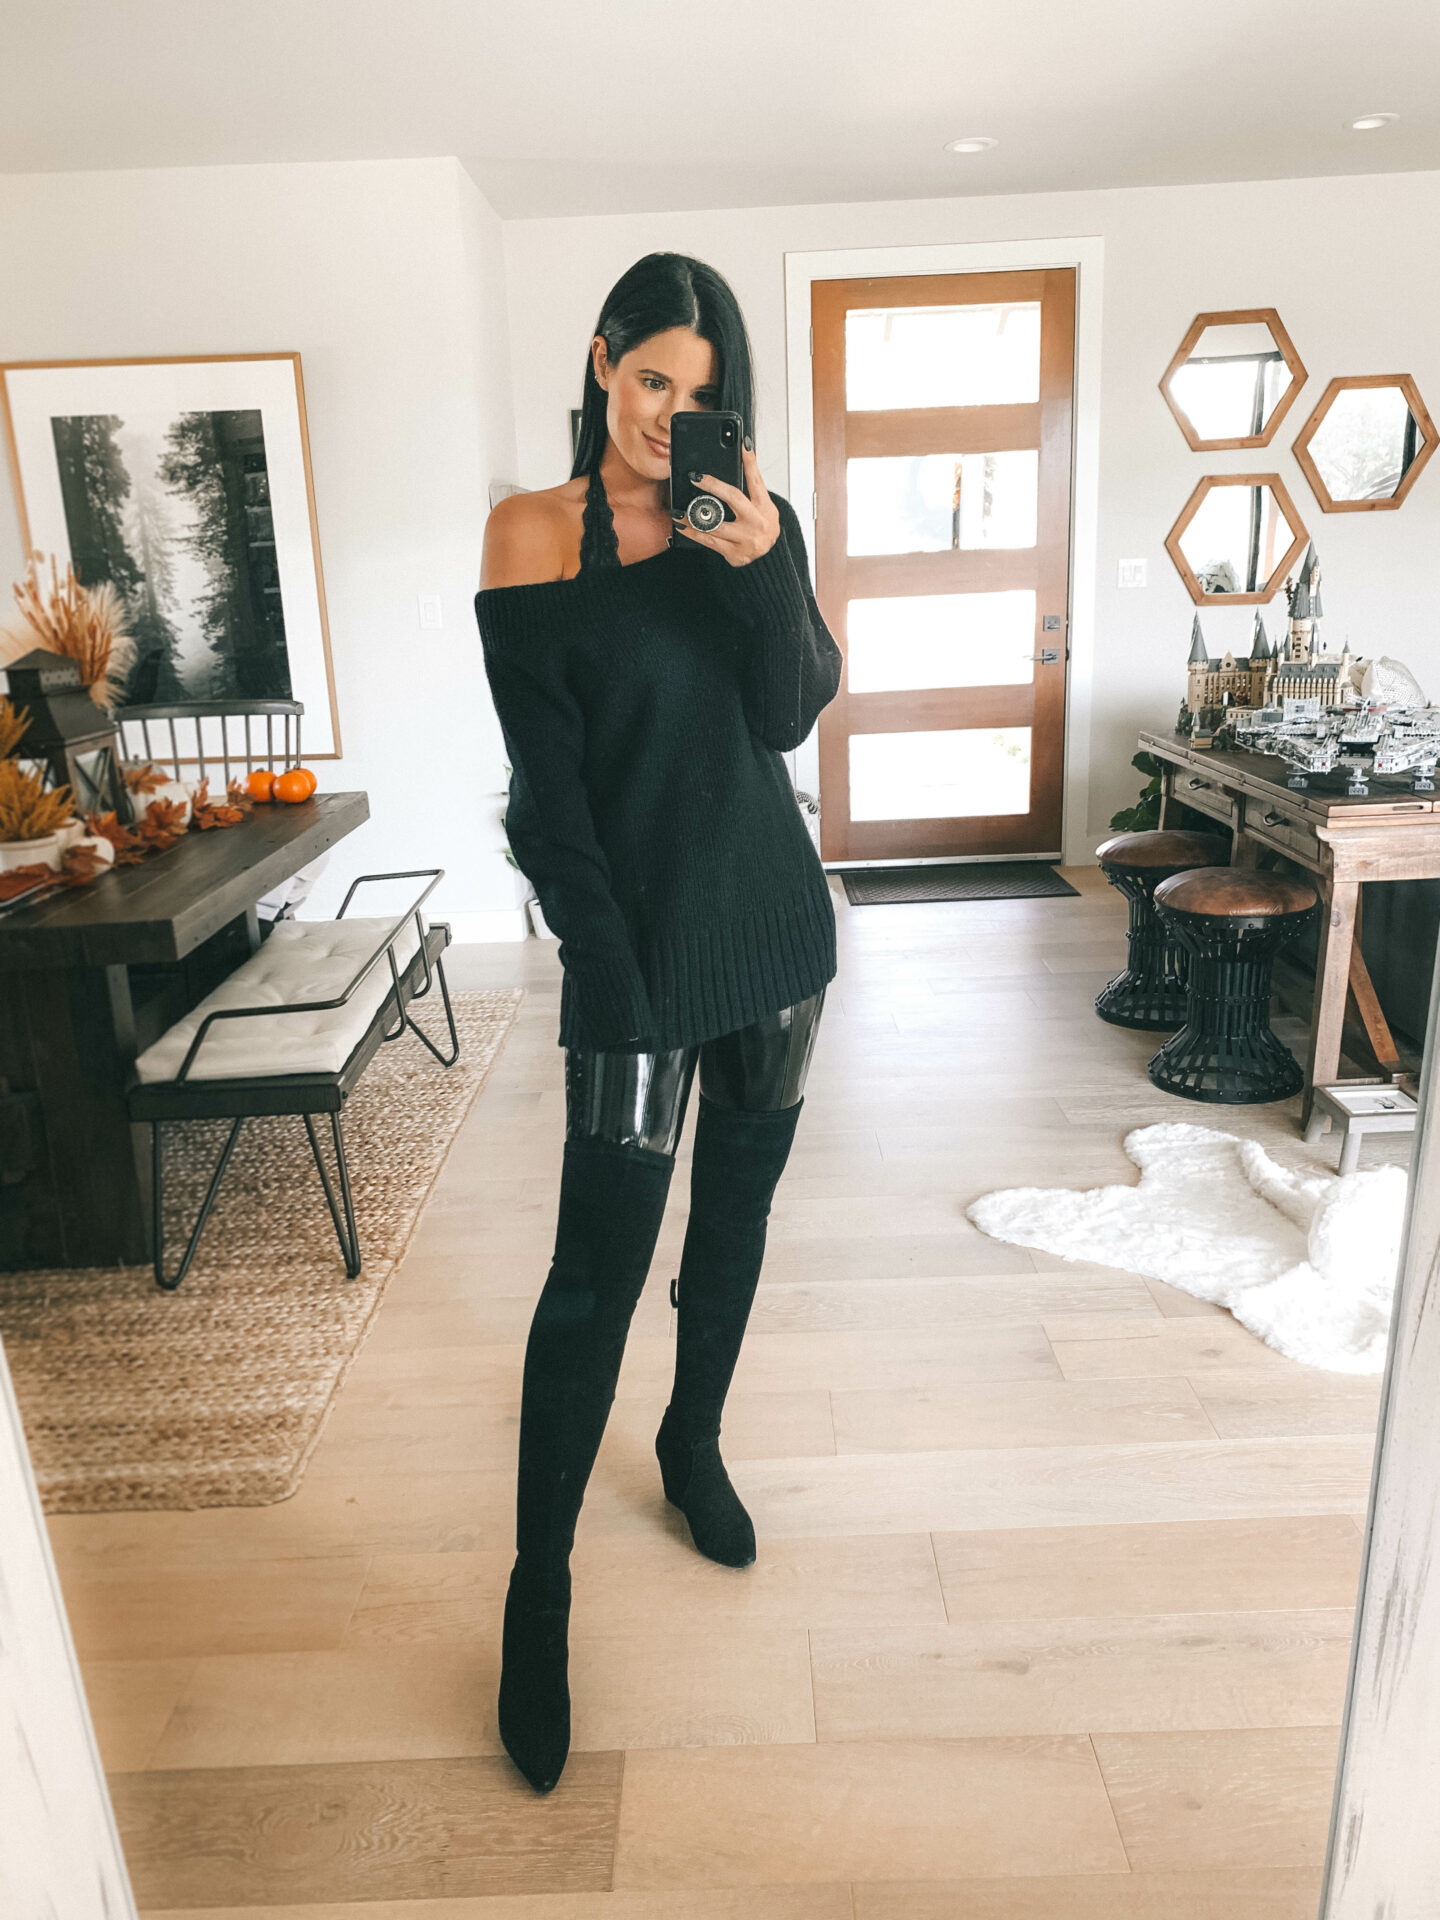 How to wear faux patent leather leggings - Dressed to Kill